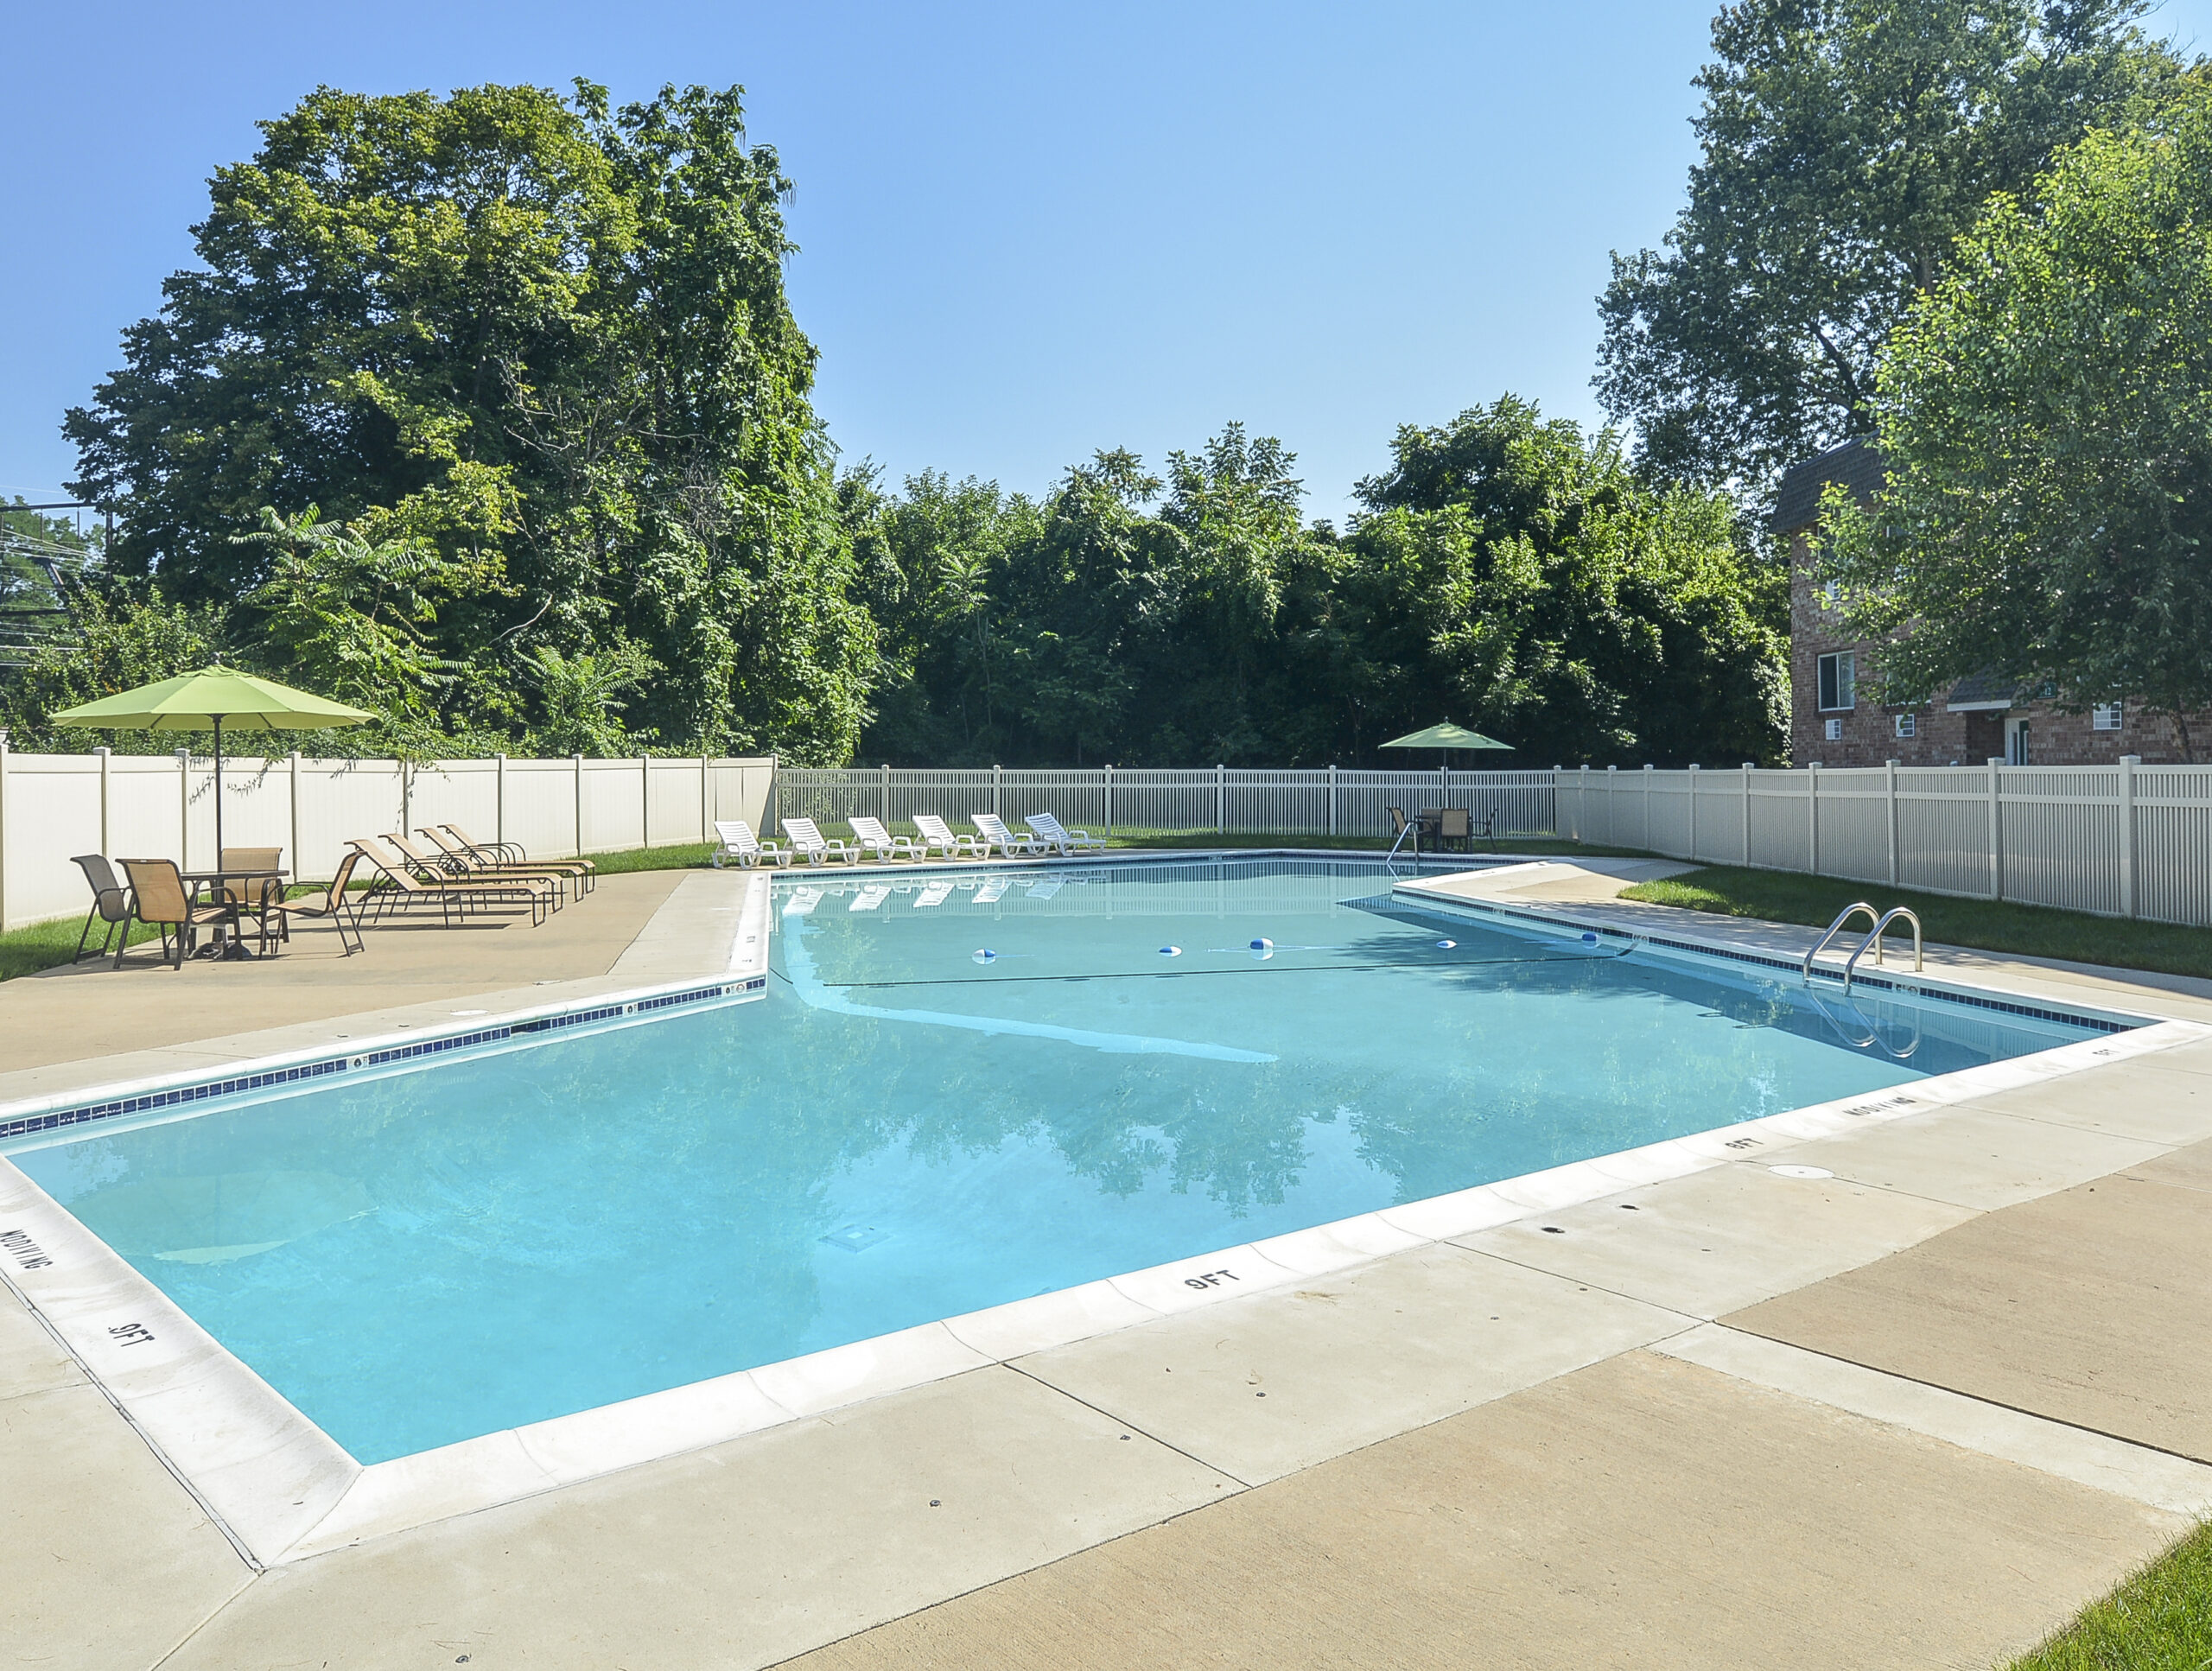 Swimming pool area of our community, fitted with a sun deck, concrete flooring, and pool chairs